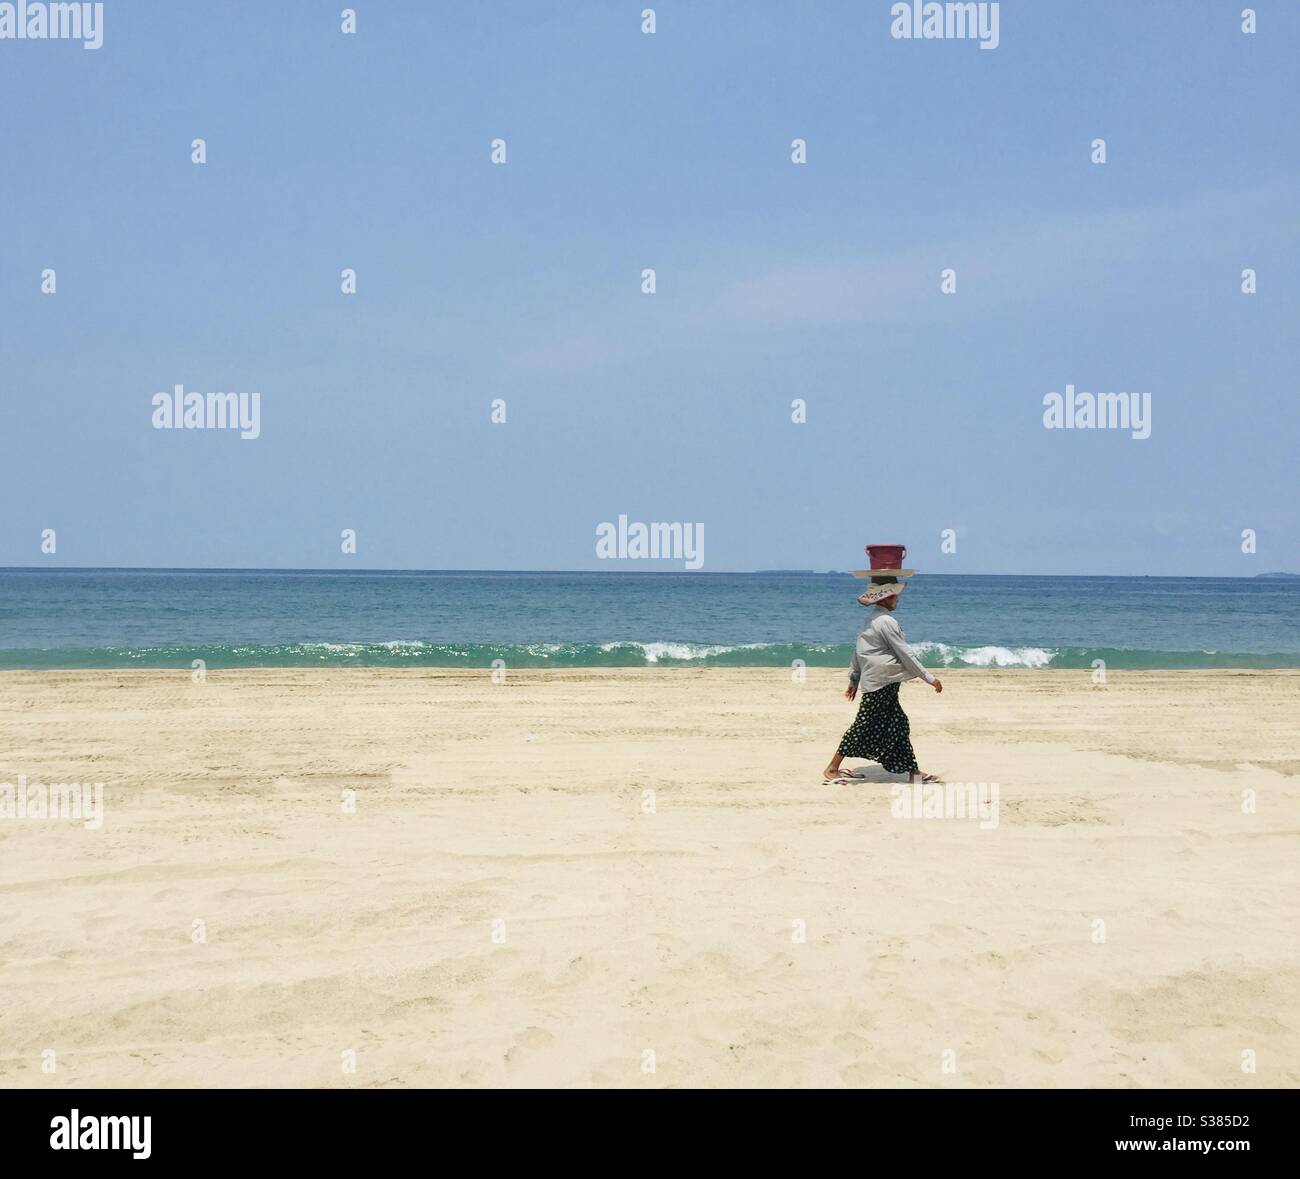 A lady walking on the beach Stock Photo